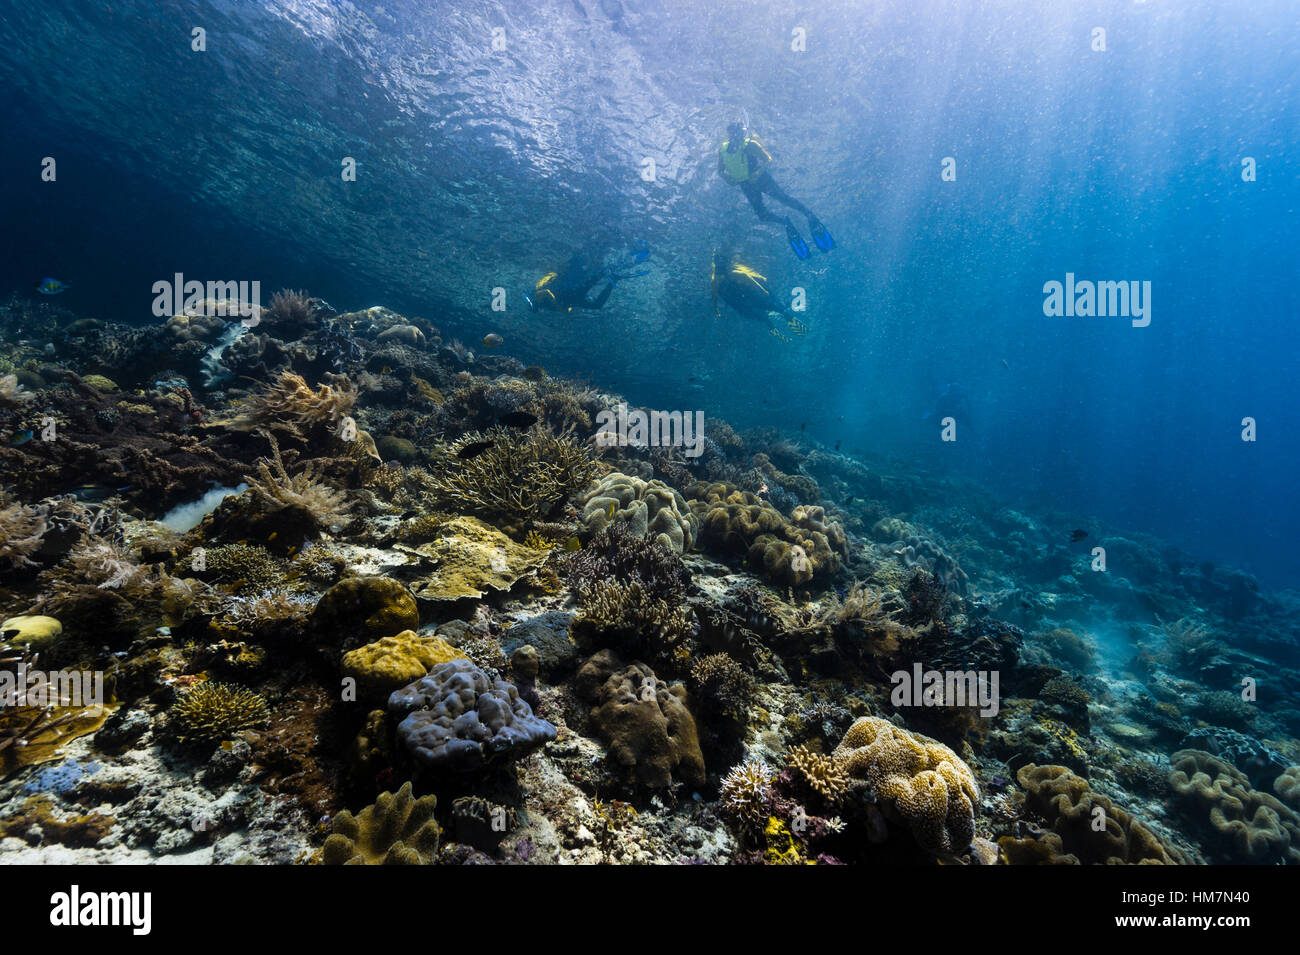 A tourist snorkeling through sunrays over a coral reef. Stock Photo